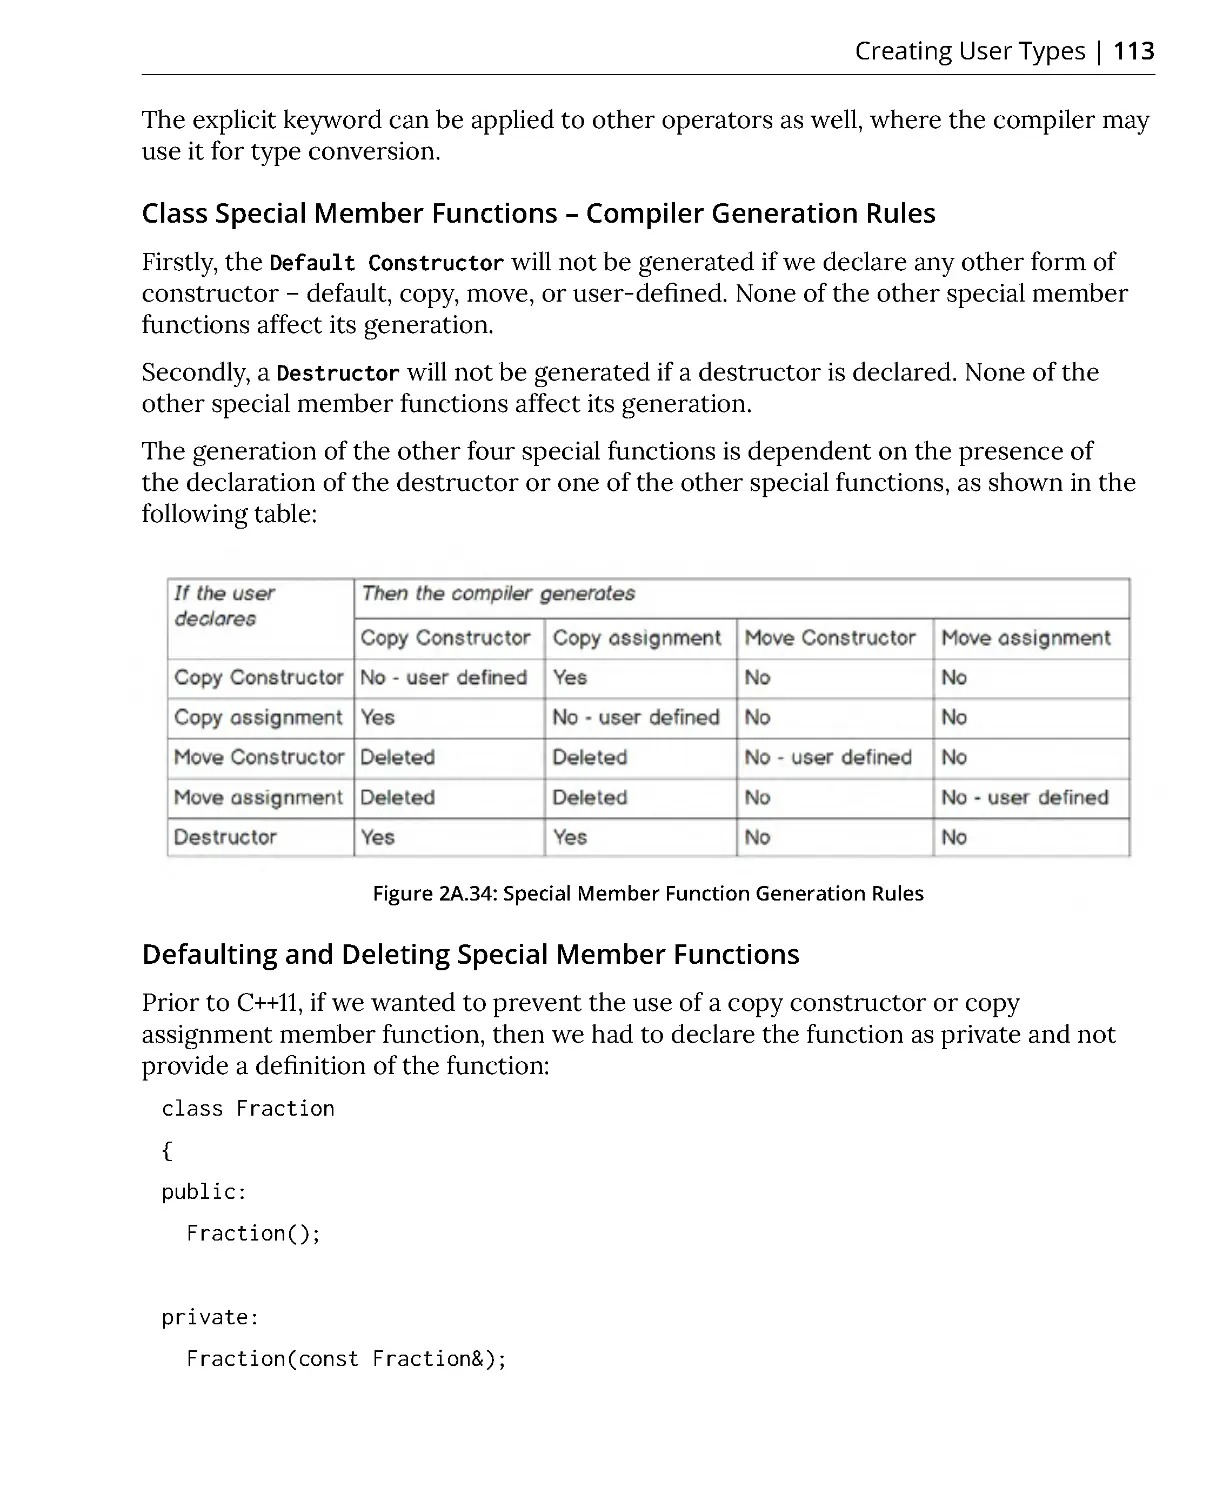 Class Special Member Functions – Compiler Generation Rules
Defaulting and Deleting Special Member Functions